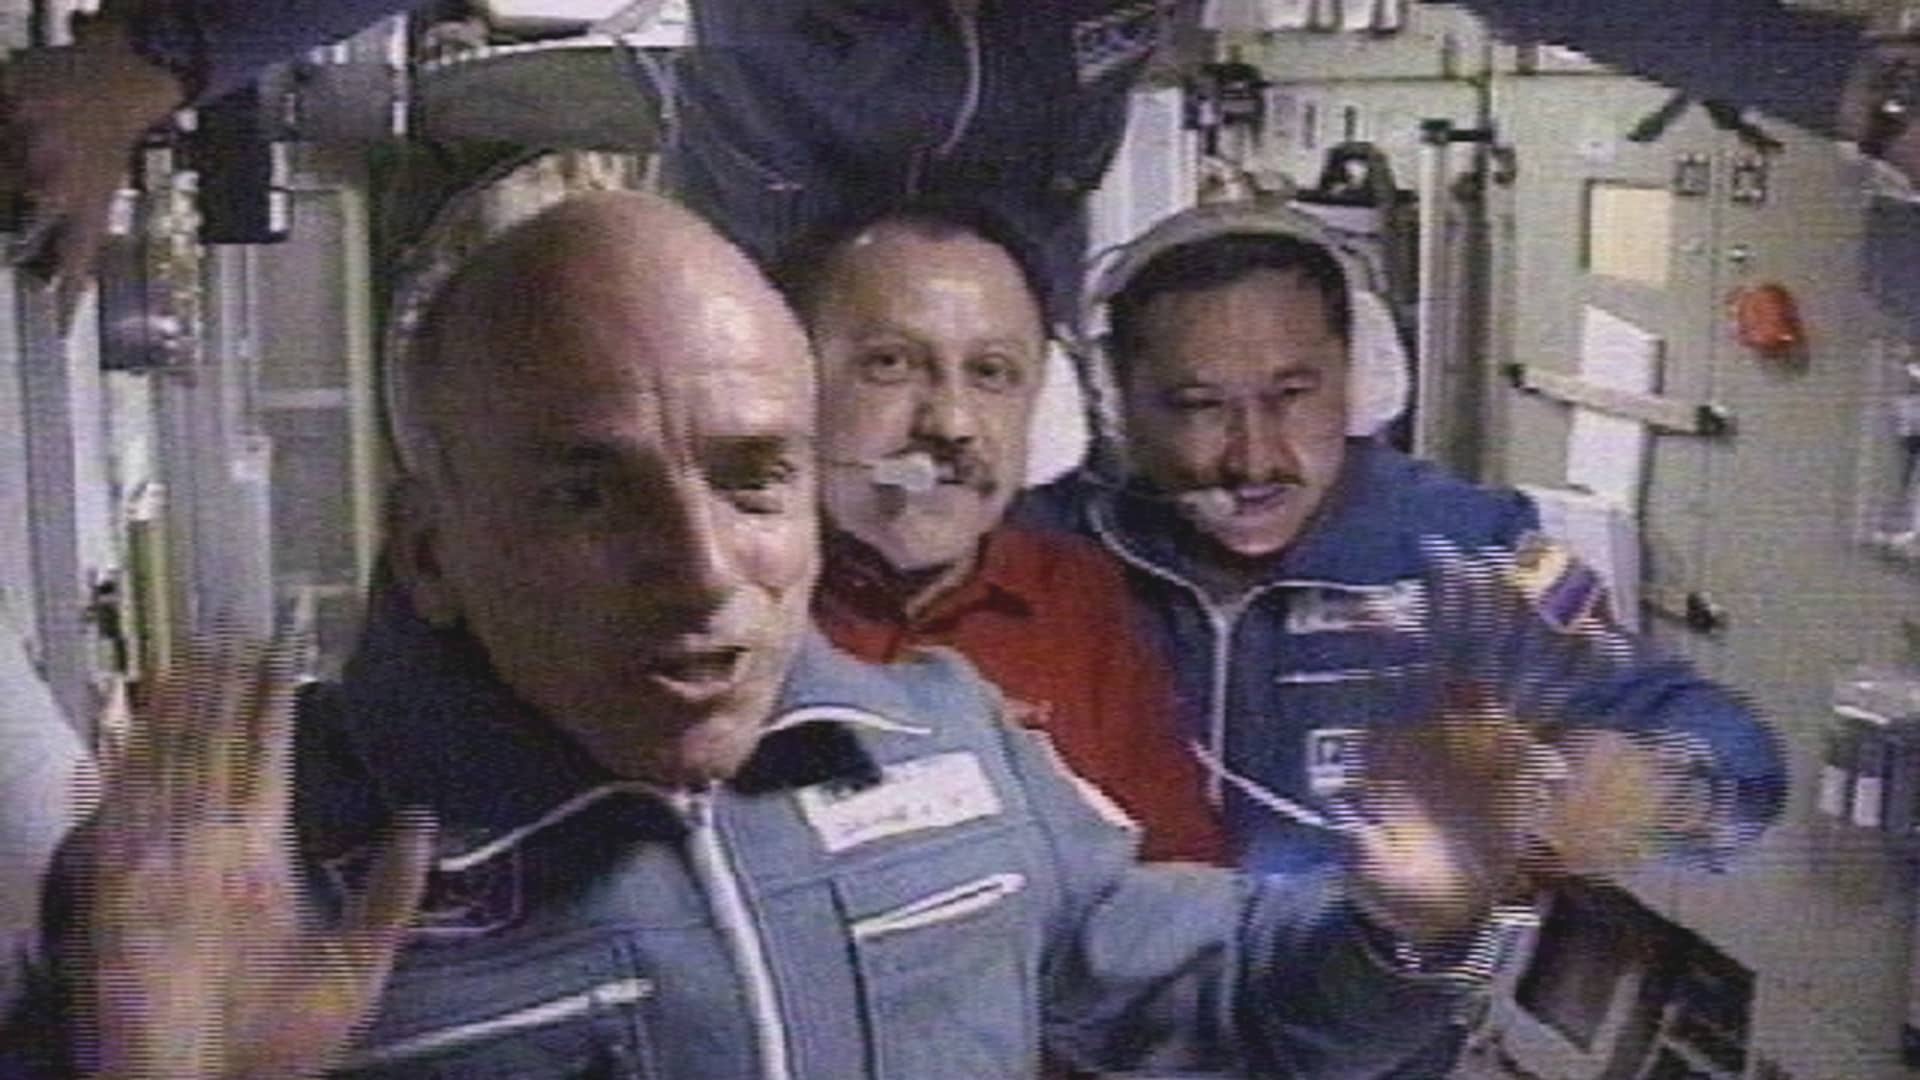 The world's first space tourist Dennis Tito waves in front of the International Space Station crew shortly after his arrival to the station April 30, 2001 in this image from television.